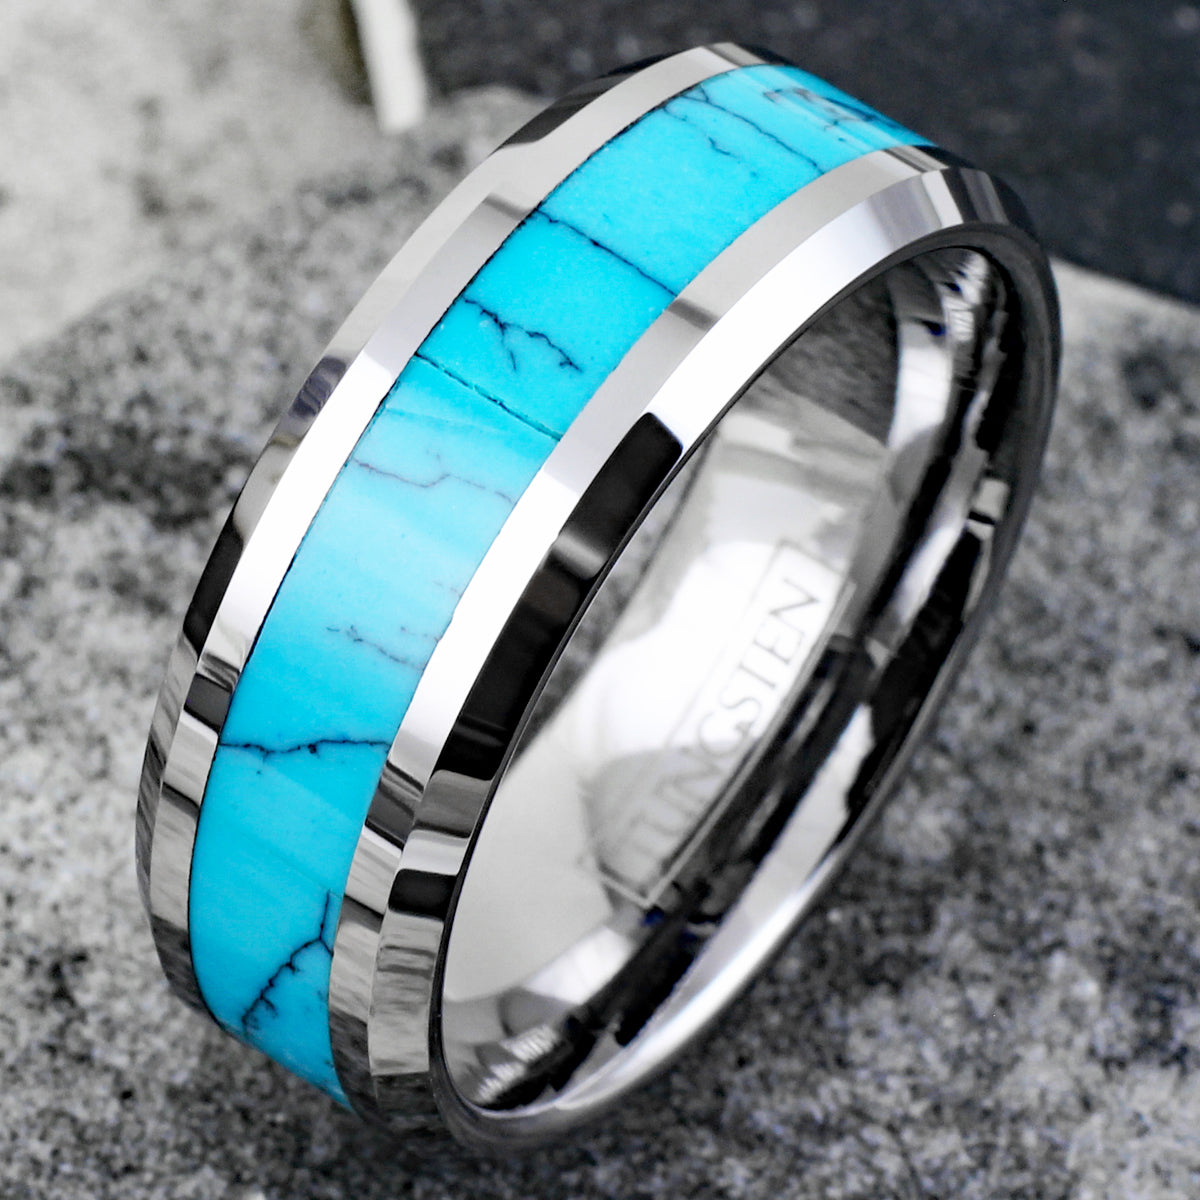 Mirror Polished Silver Tungsten Wedding Band with A Sassy Turquoise Inlay. for Men and Women. Couple Ring